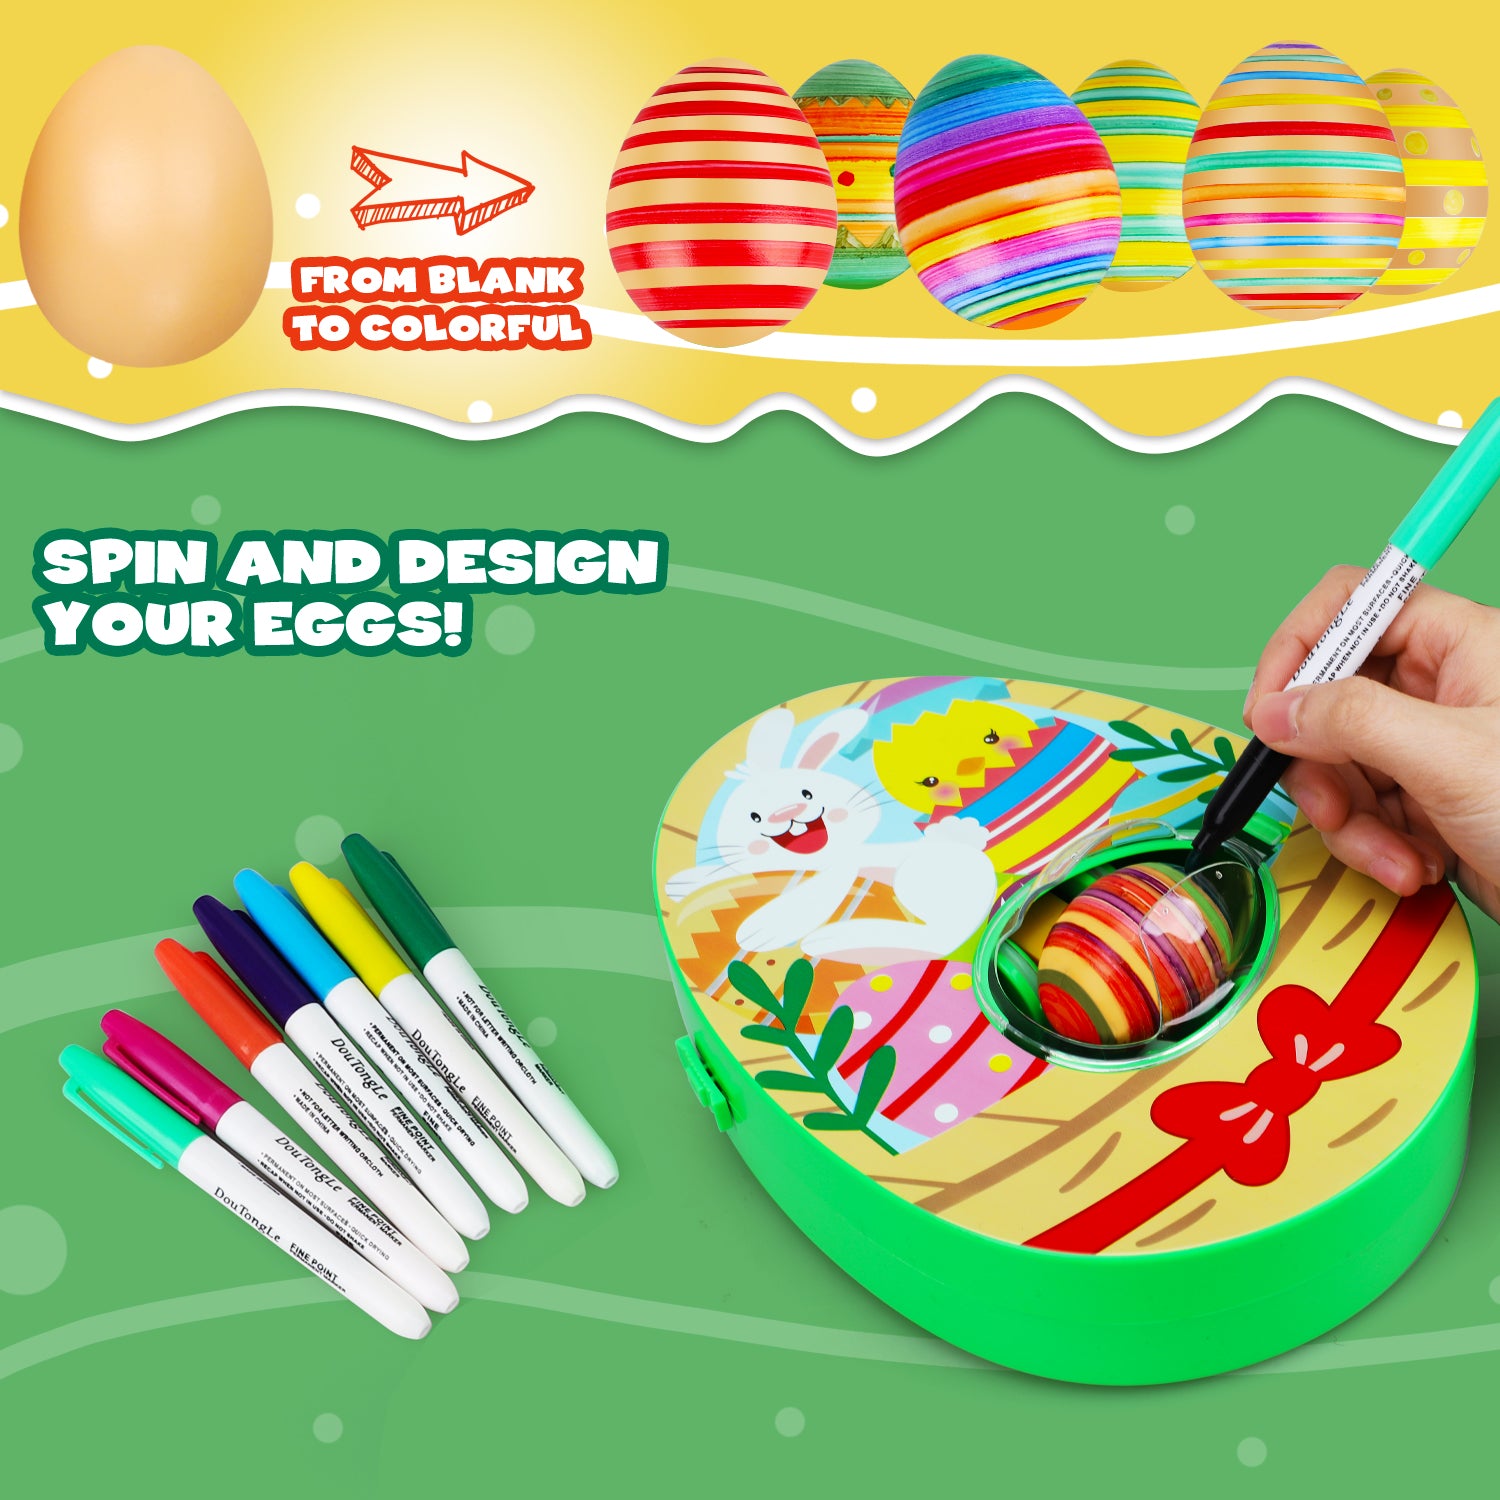 Easter Basket Stuffers/Gifts for Kids, Easter Egg Decorating Kit with 8  Coloring Markers and 8 Plastic Eggs, Bunny Egg Dye Kit Spinner Arts Crafts  for